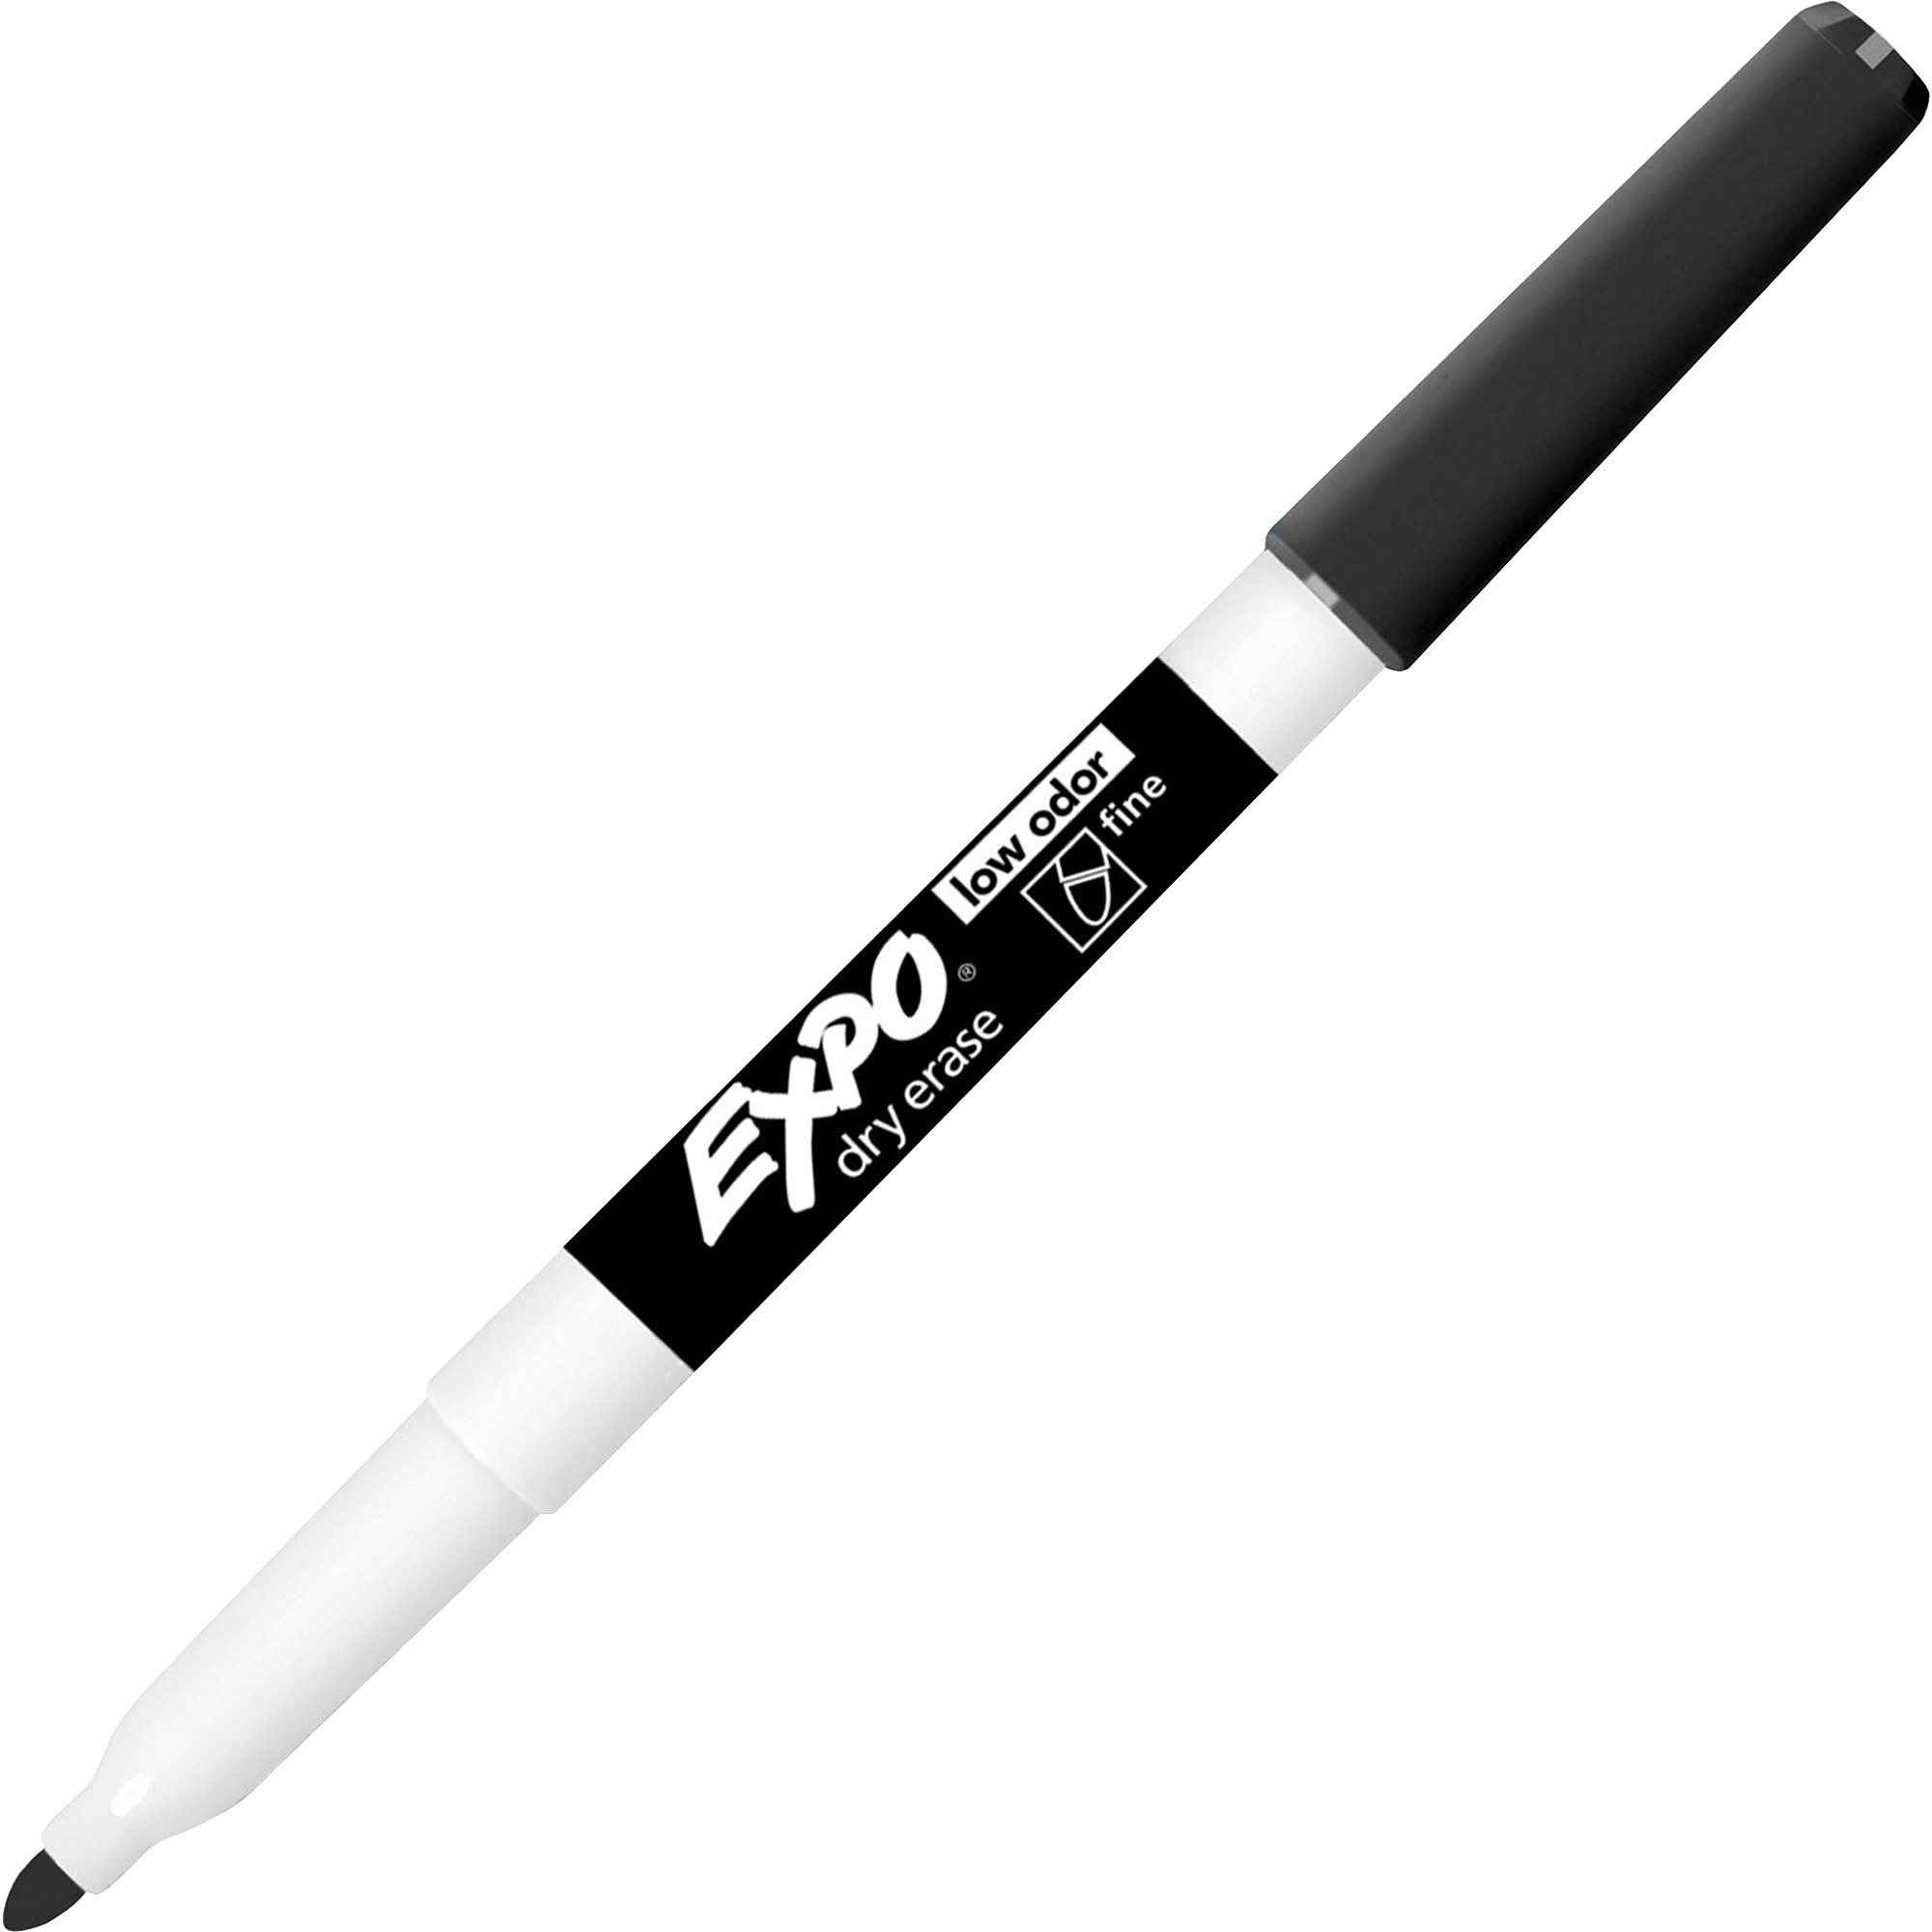 expo dry erase markers